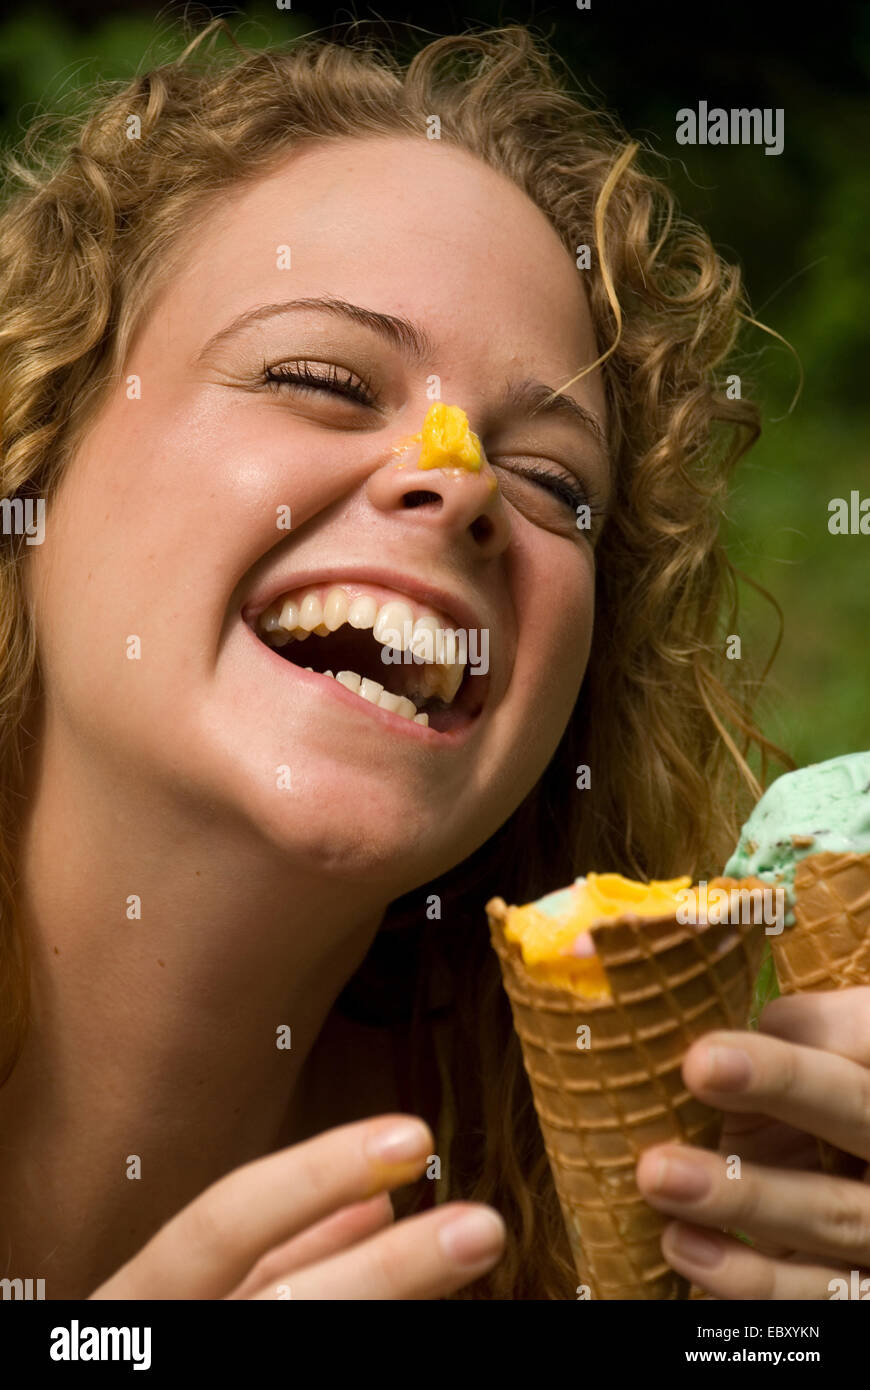 Laughing woman with ice on her nose Stock Photo